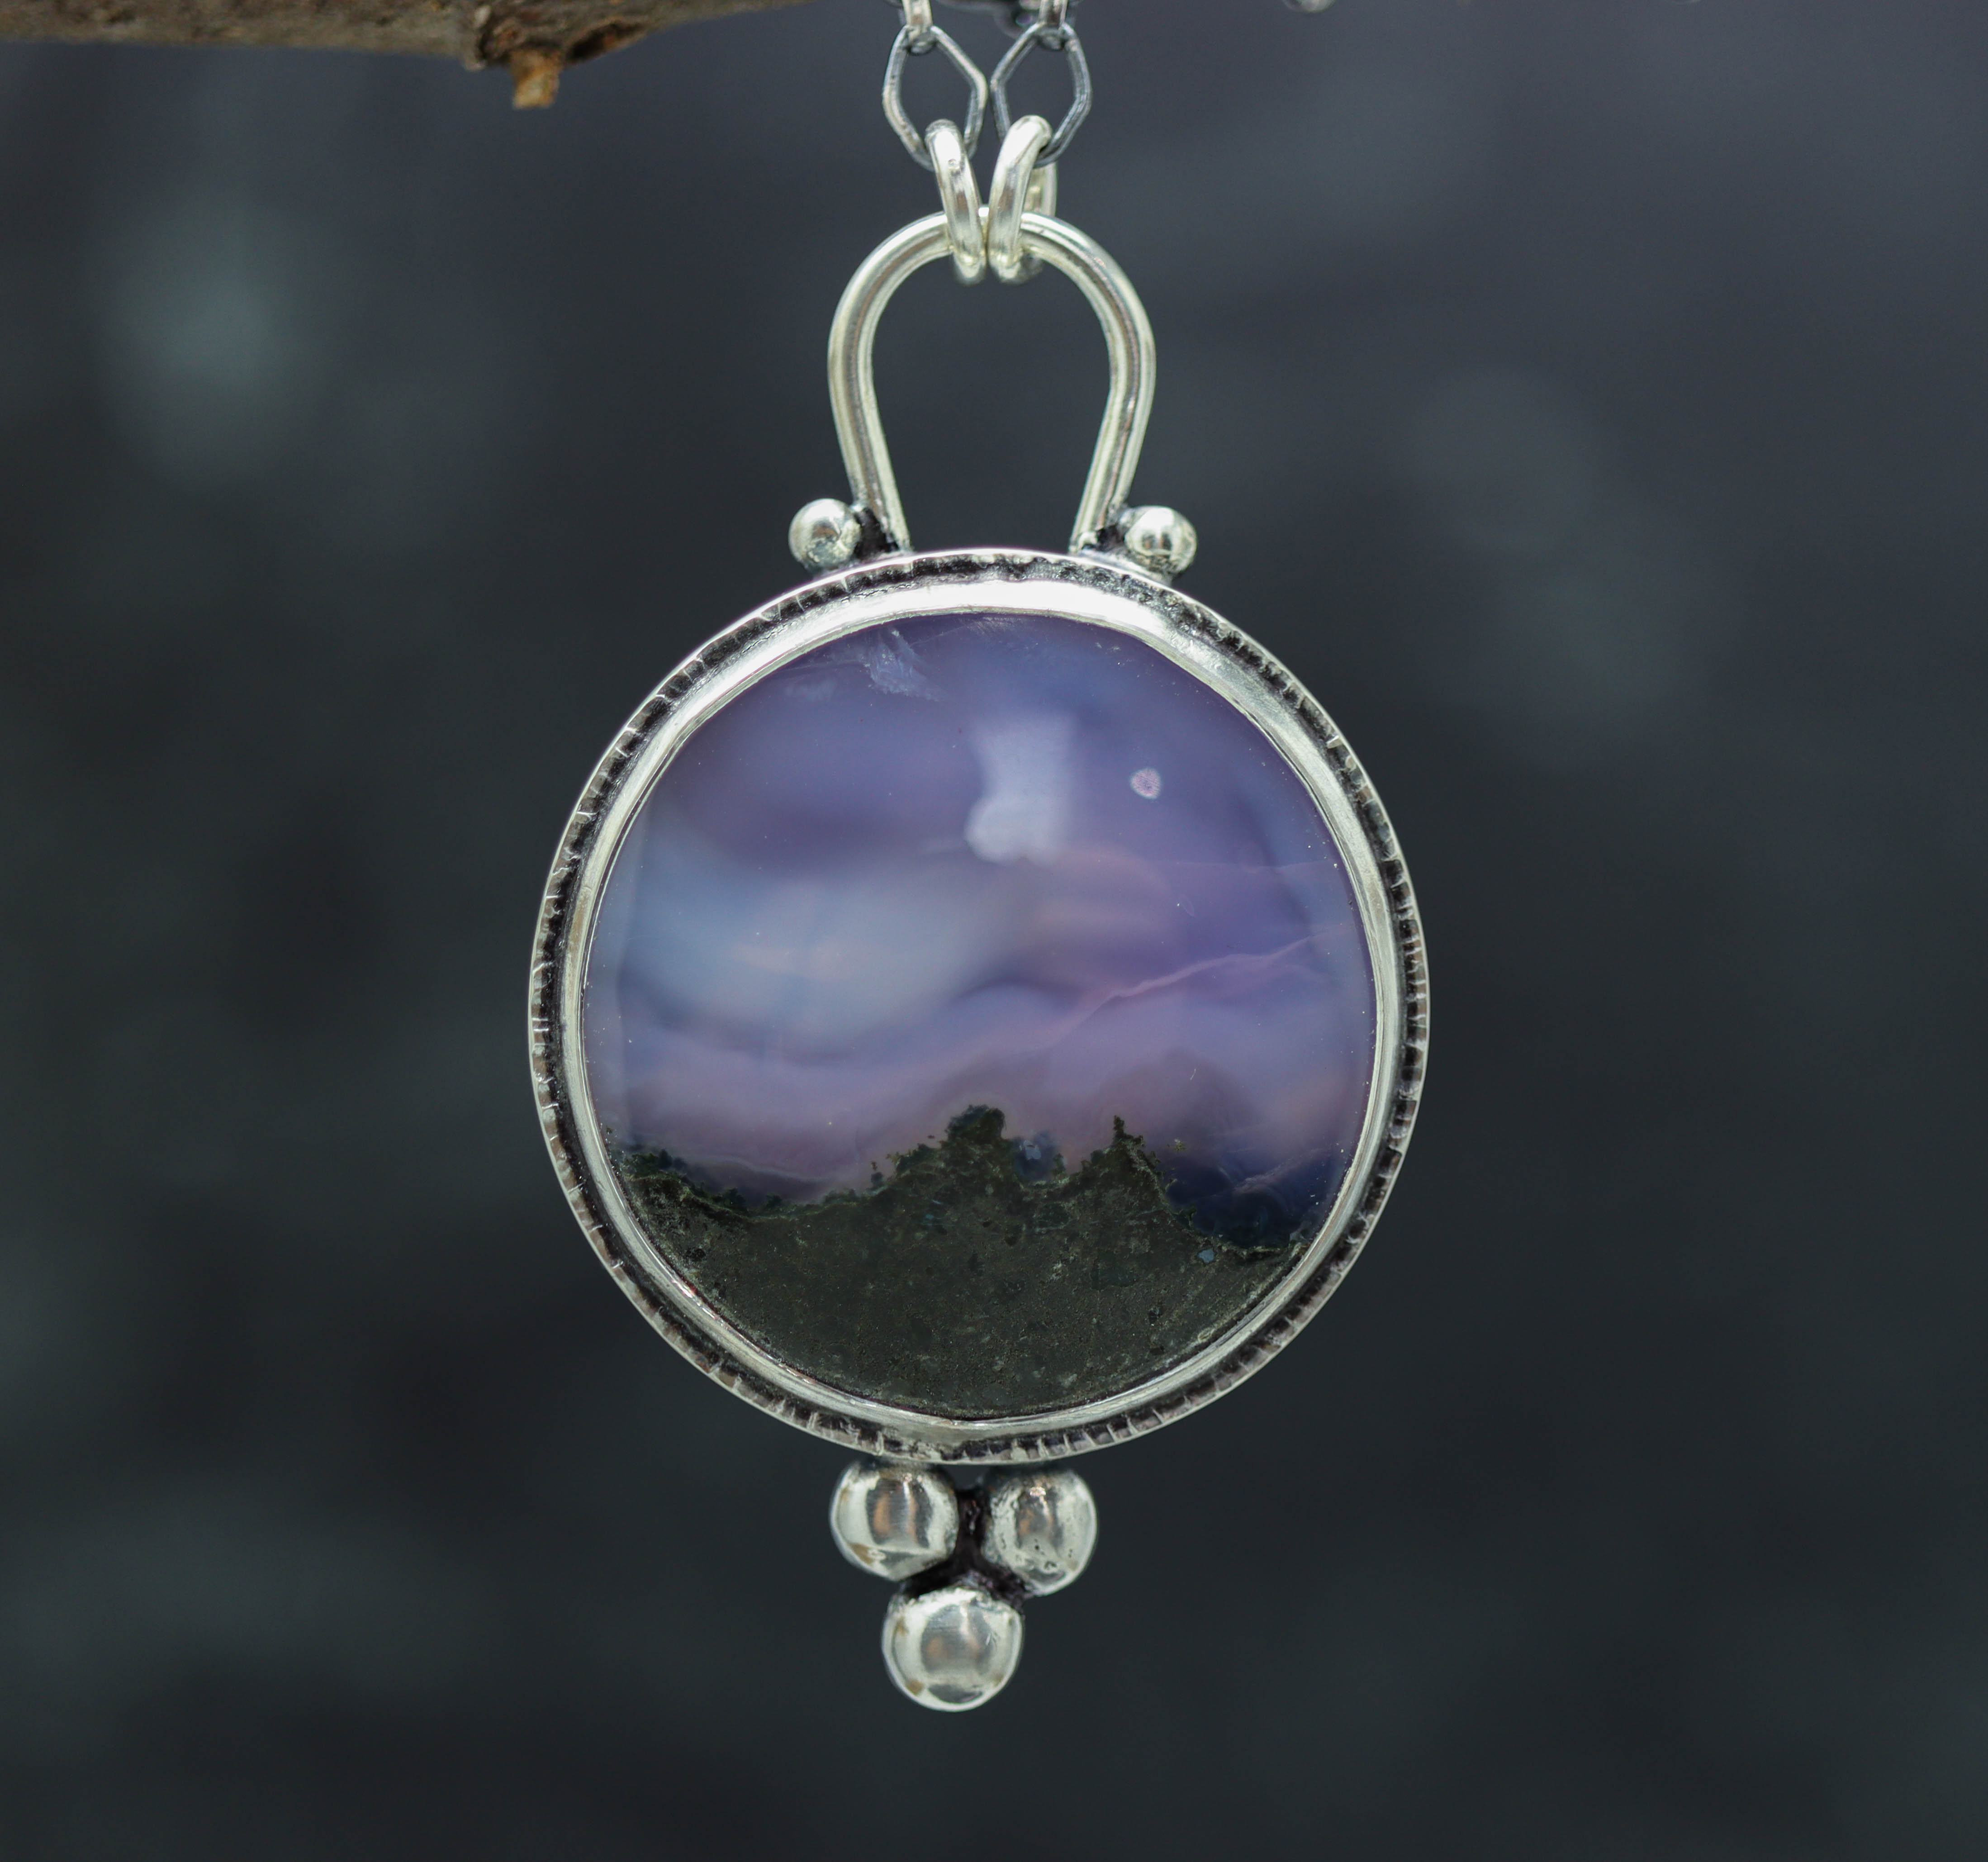 Purple Moss Agate Pendant Sterling Silver One Of a Kind Gemstone Necklace